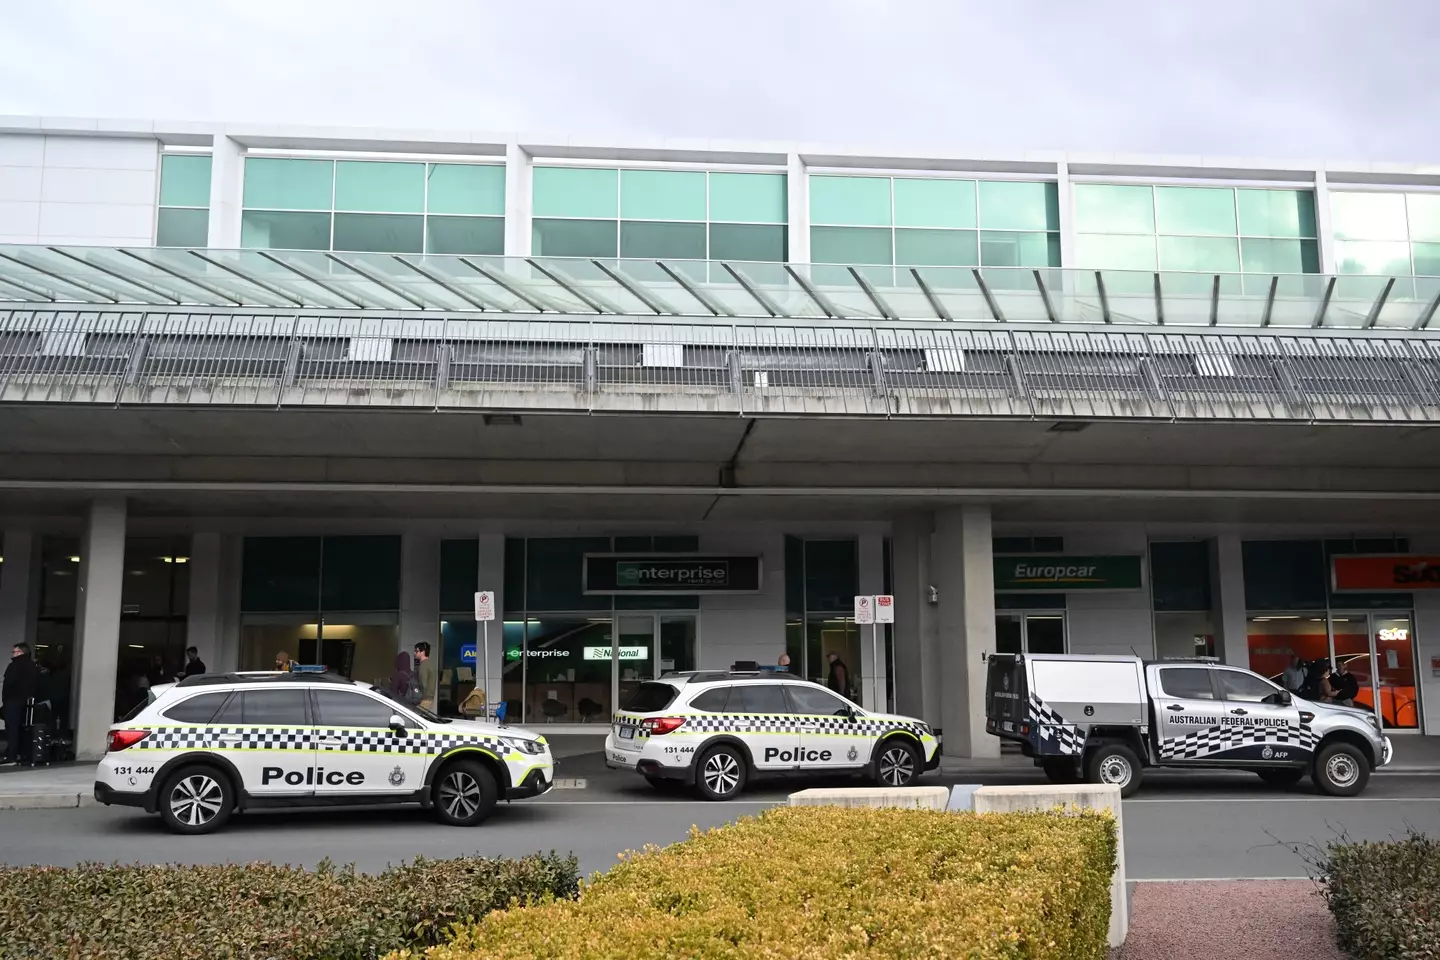 A man has been arrested after opening fire in an Australian airport.